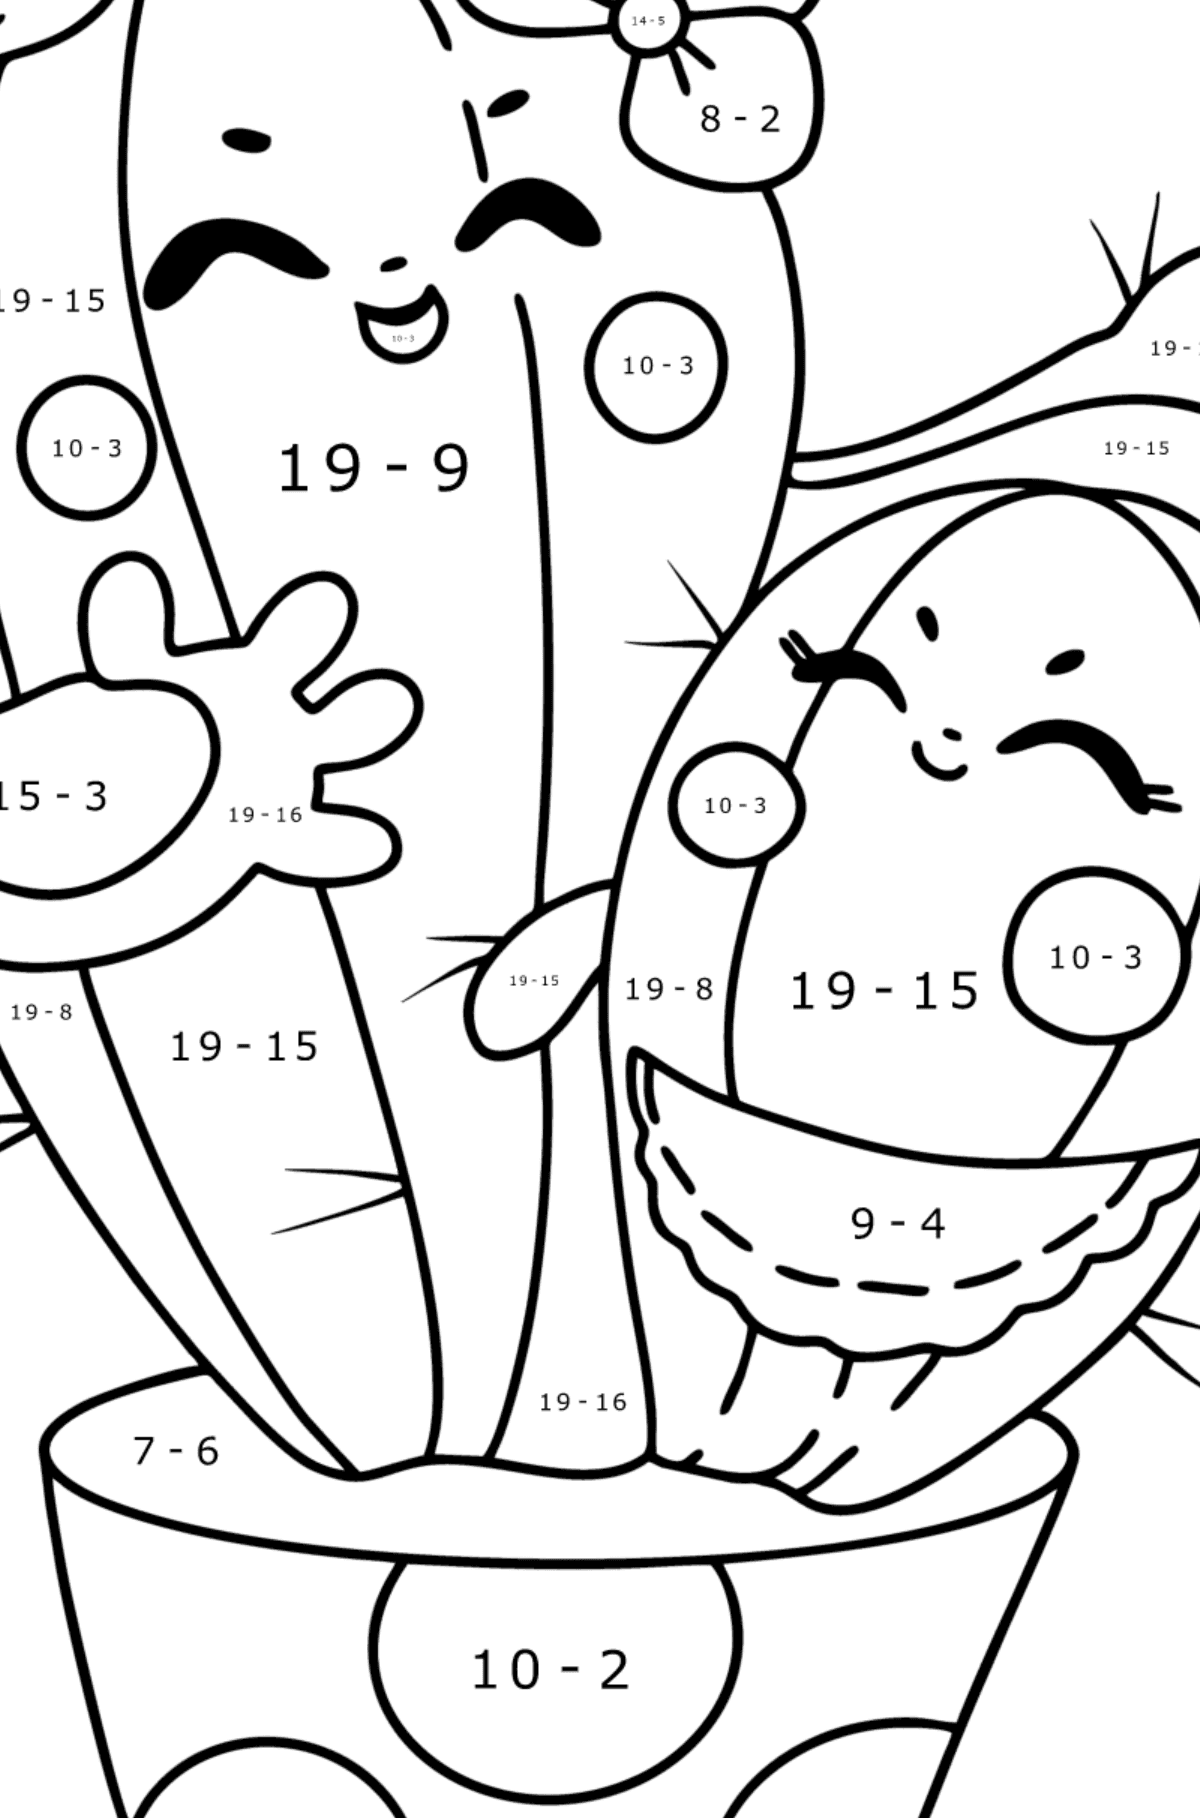 Cartoon Cactus coloring page - Math Coloring - Subtraction for Kids